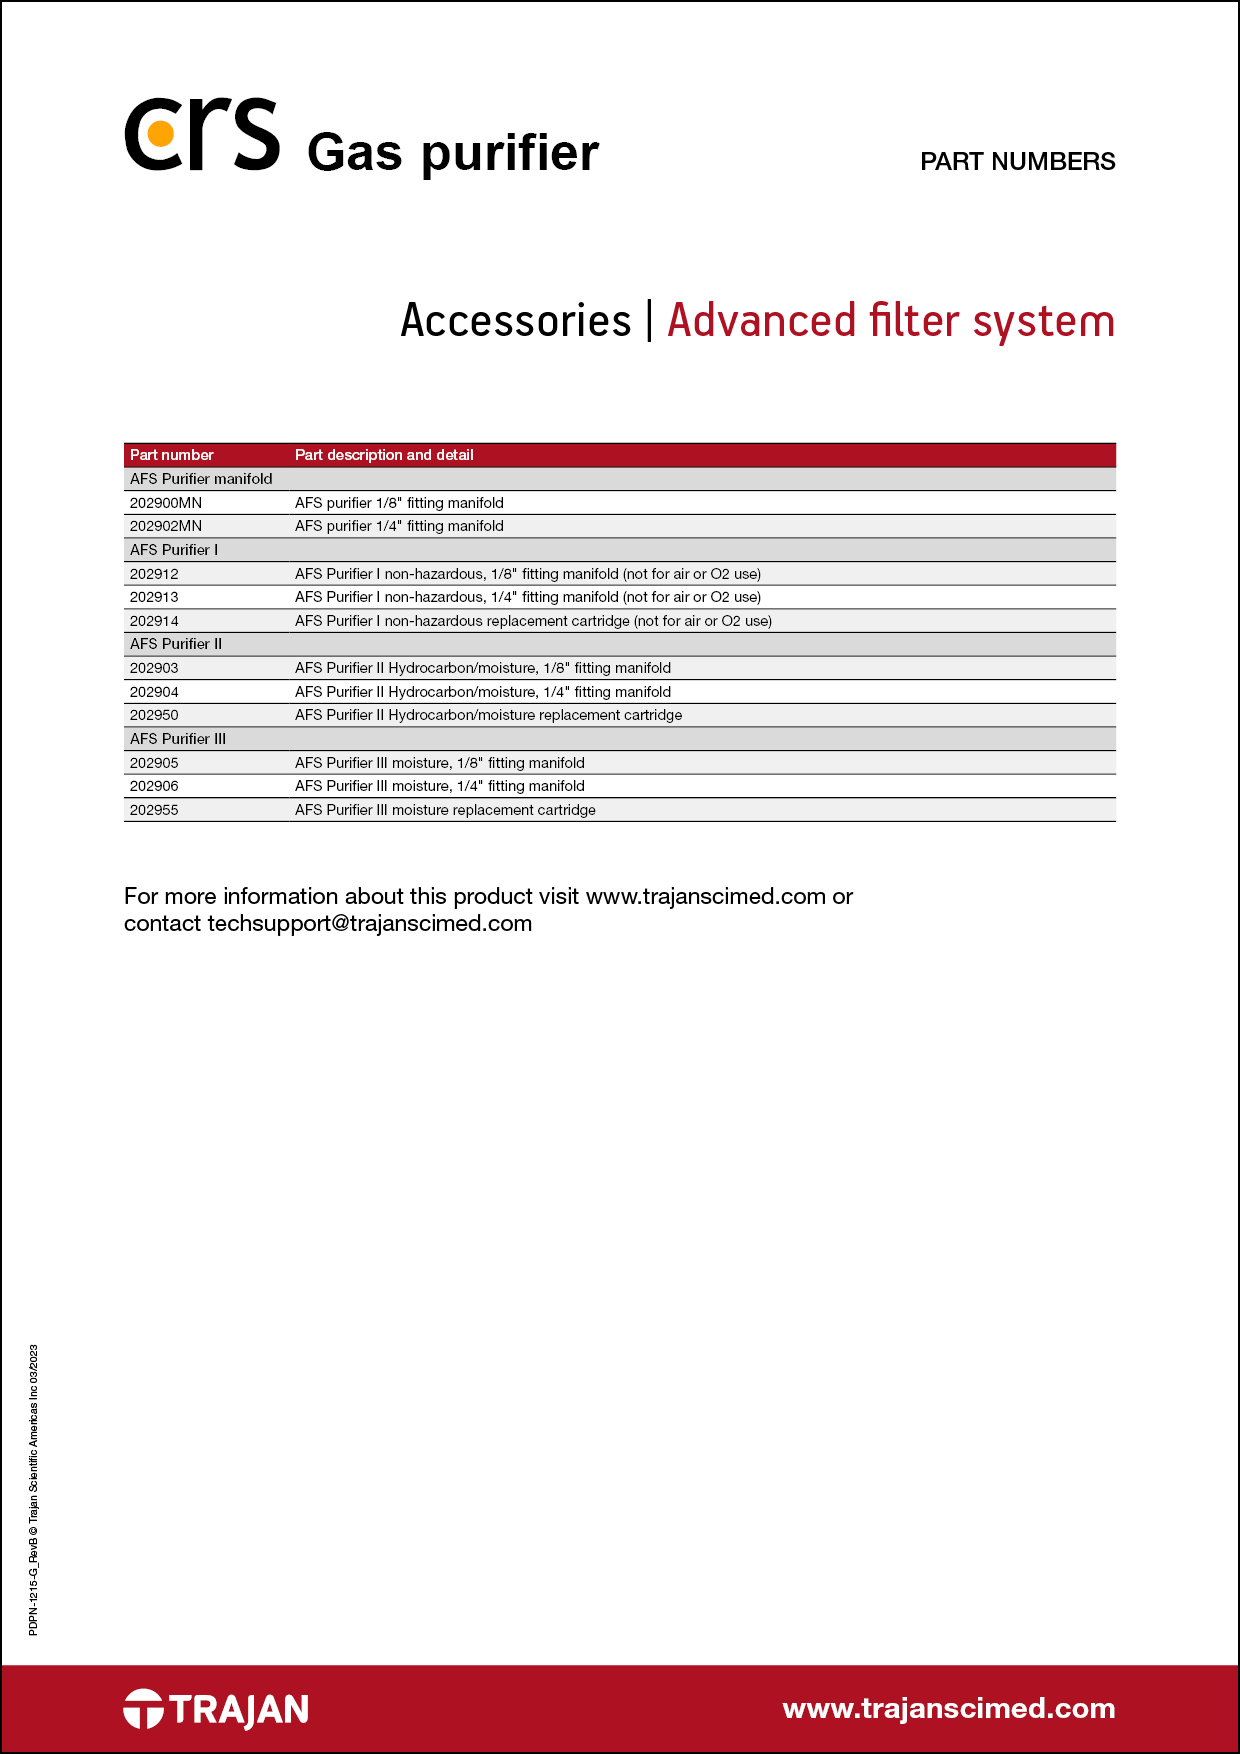 Part Number List - CRS Advanced Filter System gas purifier